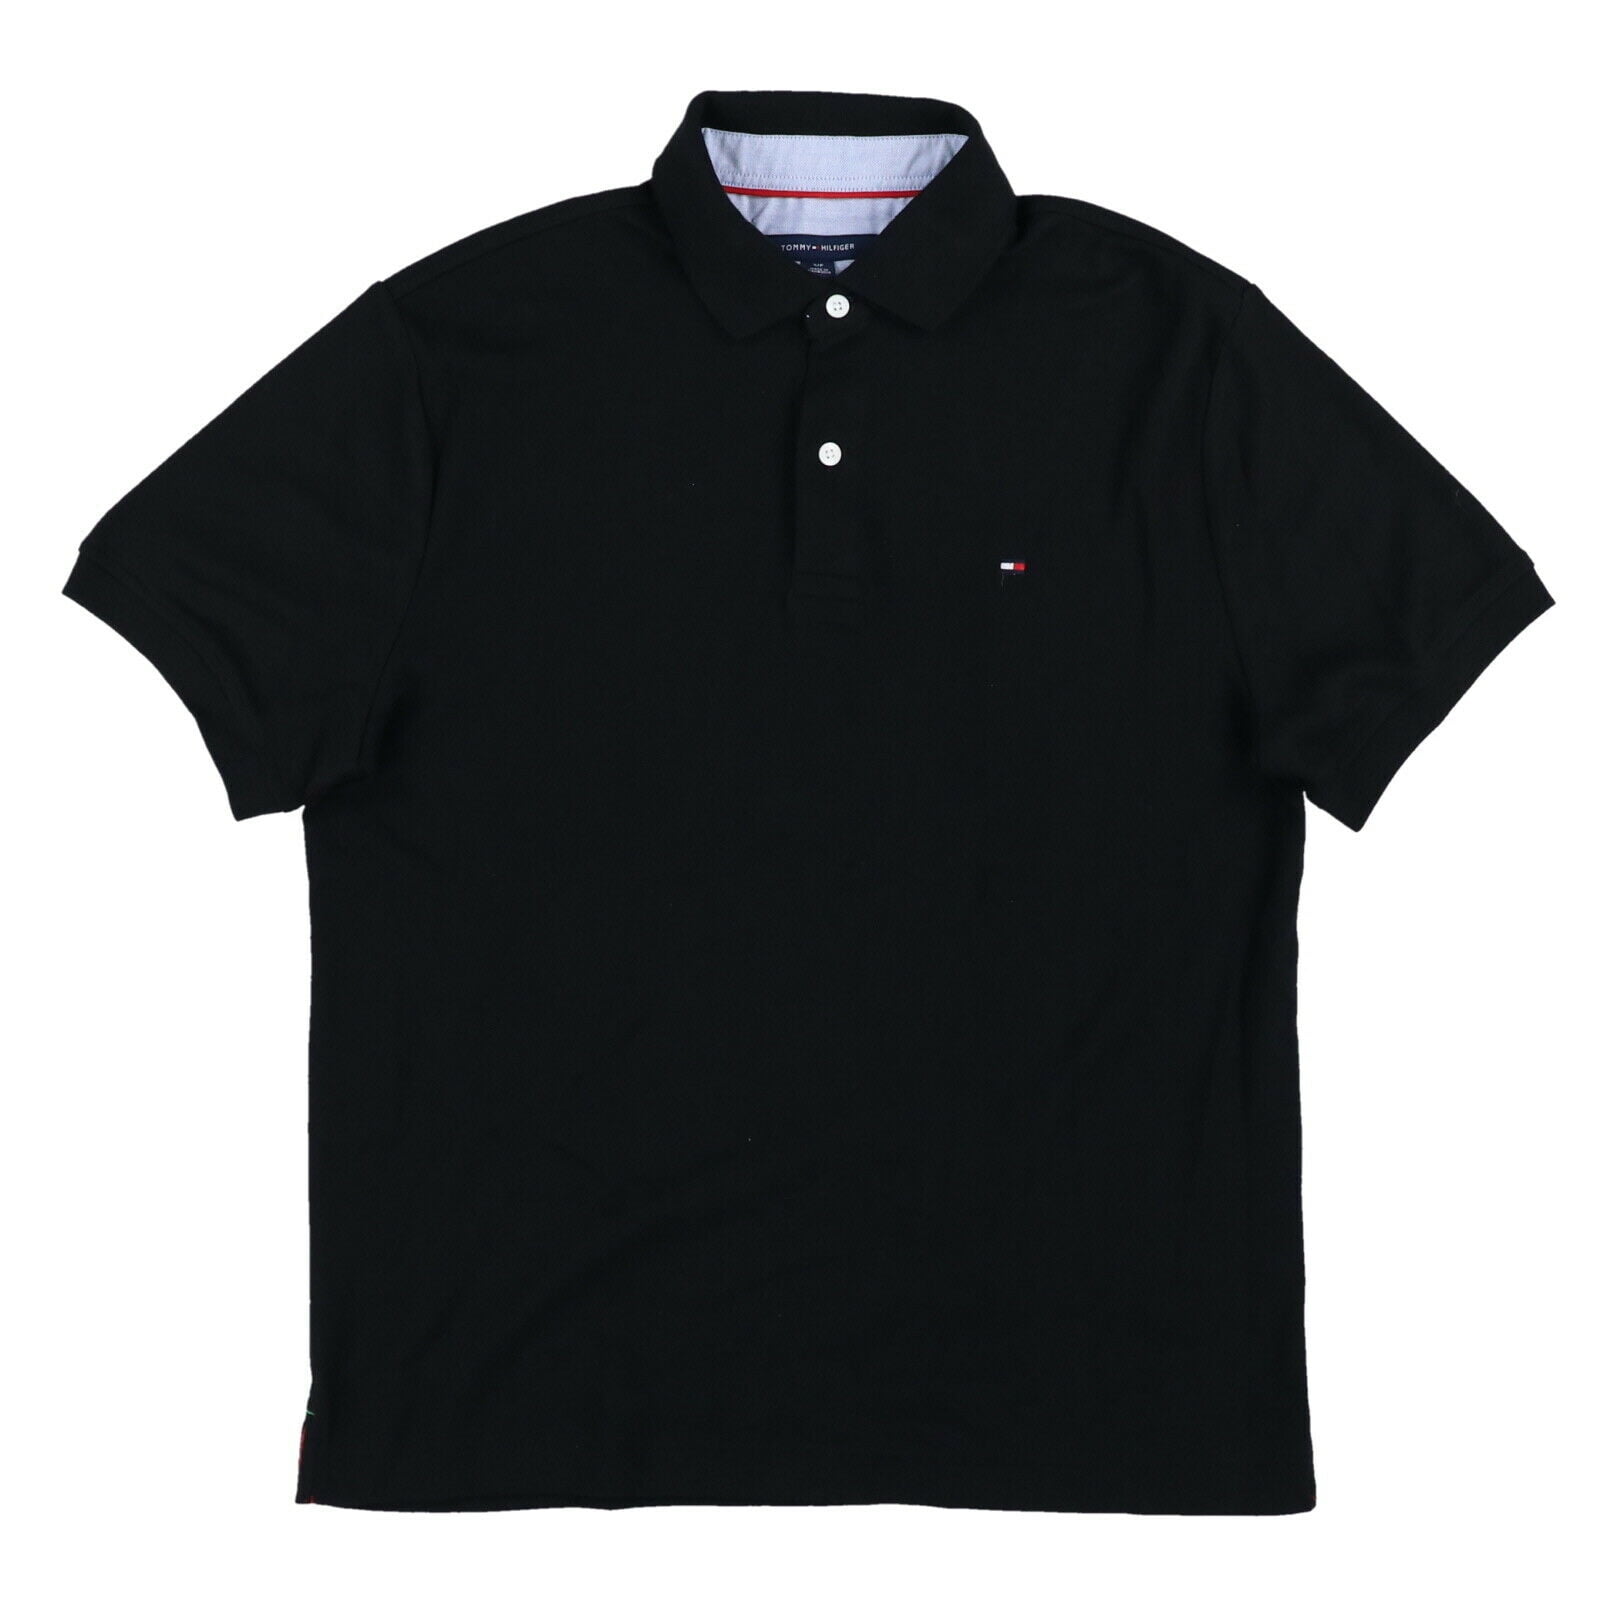 Green-Certified Tommy Hilfiger POLO SHIRT new with tag MEN'S CLASSIC ...